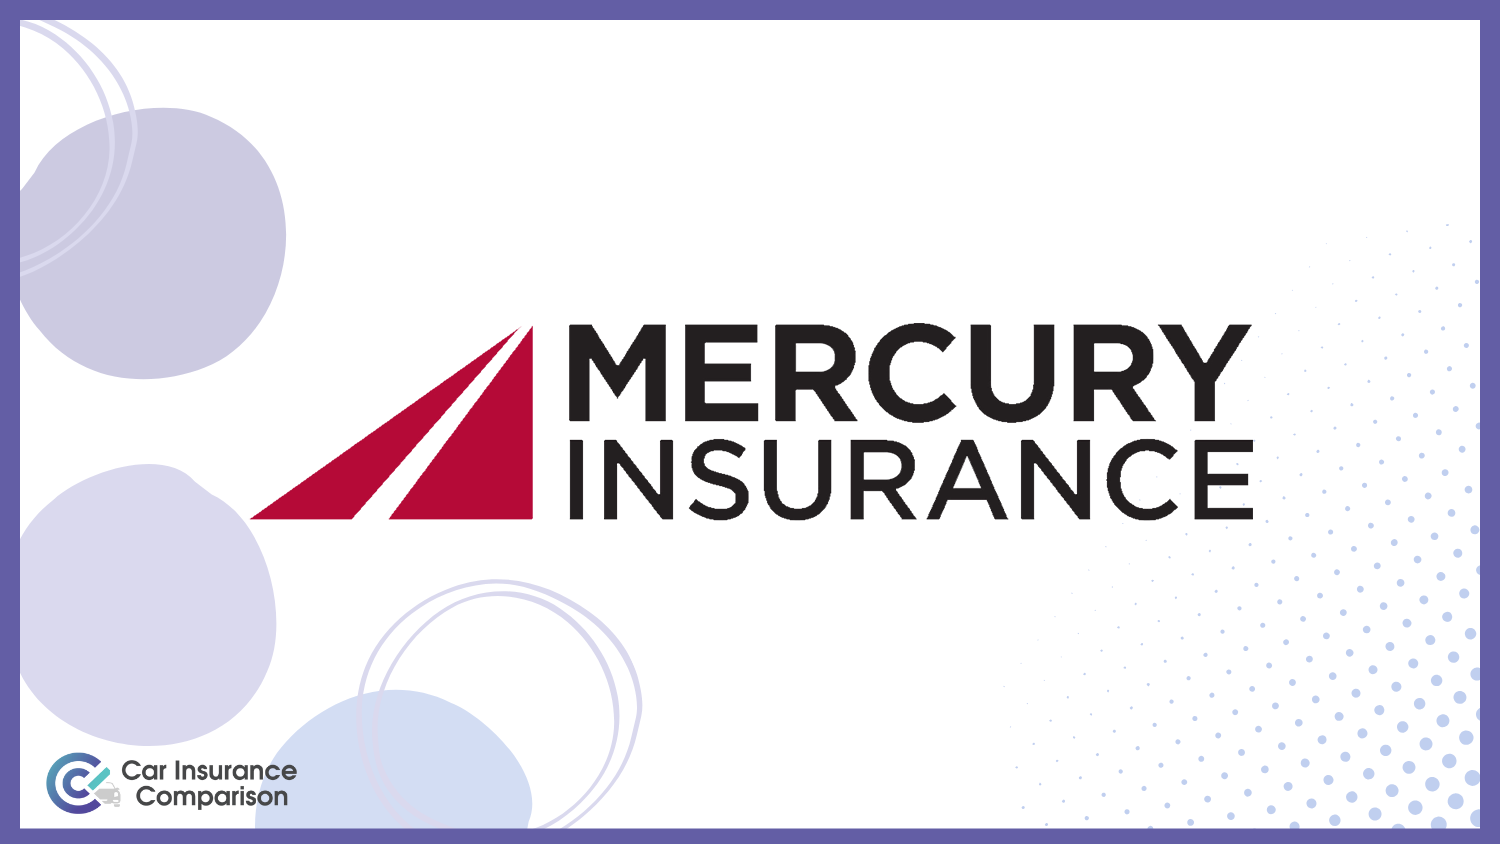 Mercury: Compare Best Car Insurance Companies That Only Look Back Three Years